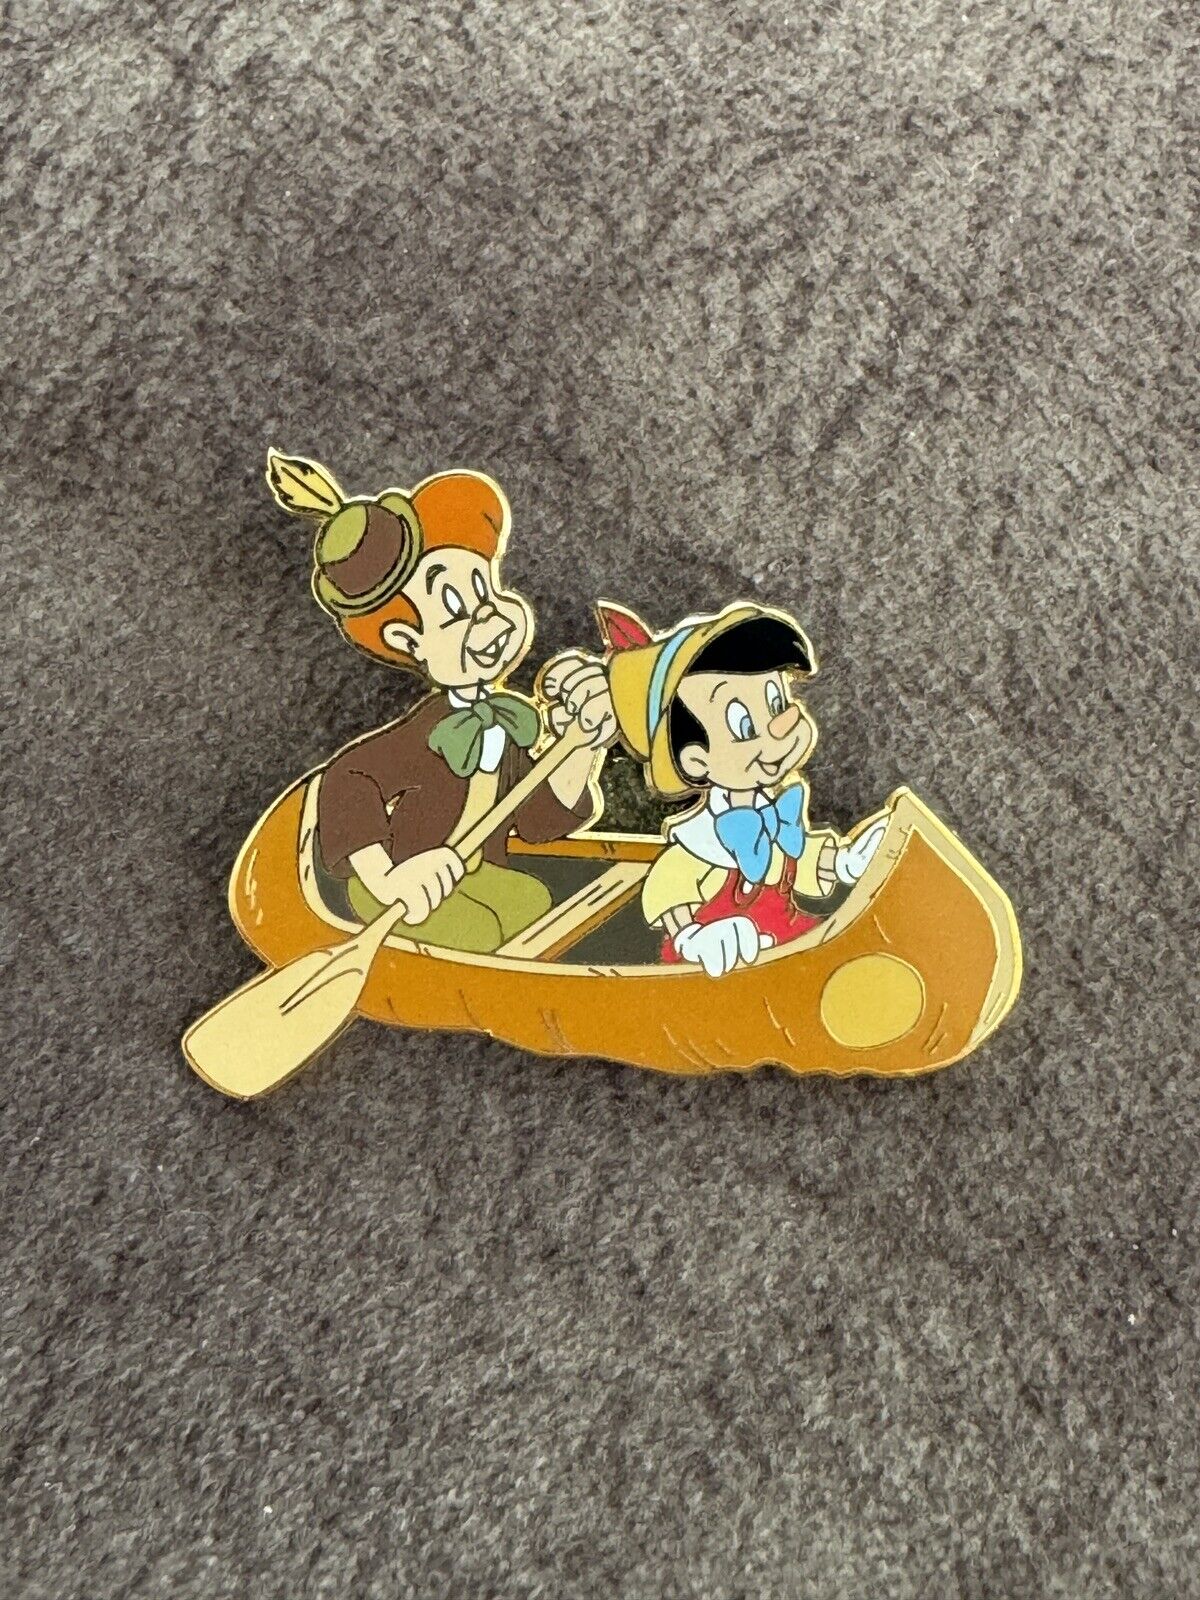 A Family Pin Gathering Pinocchio and Lampwick in Canoe Boat Disney Pin LE 200